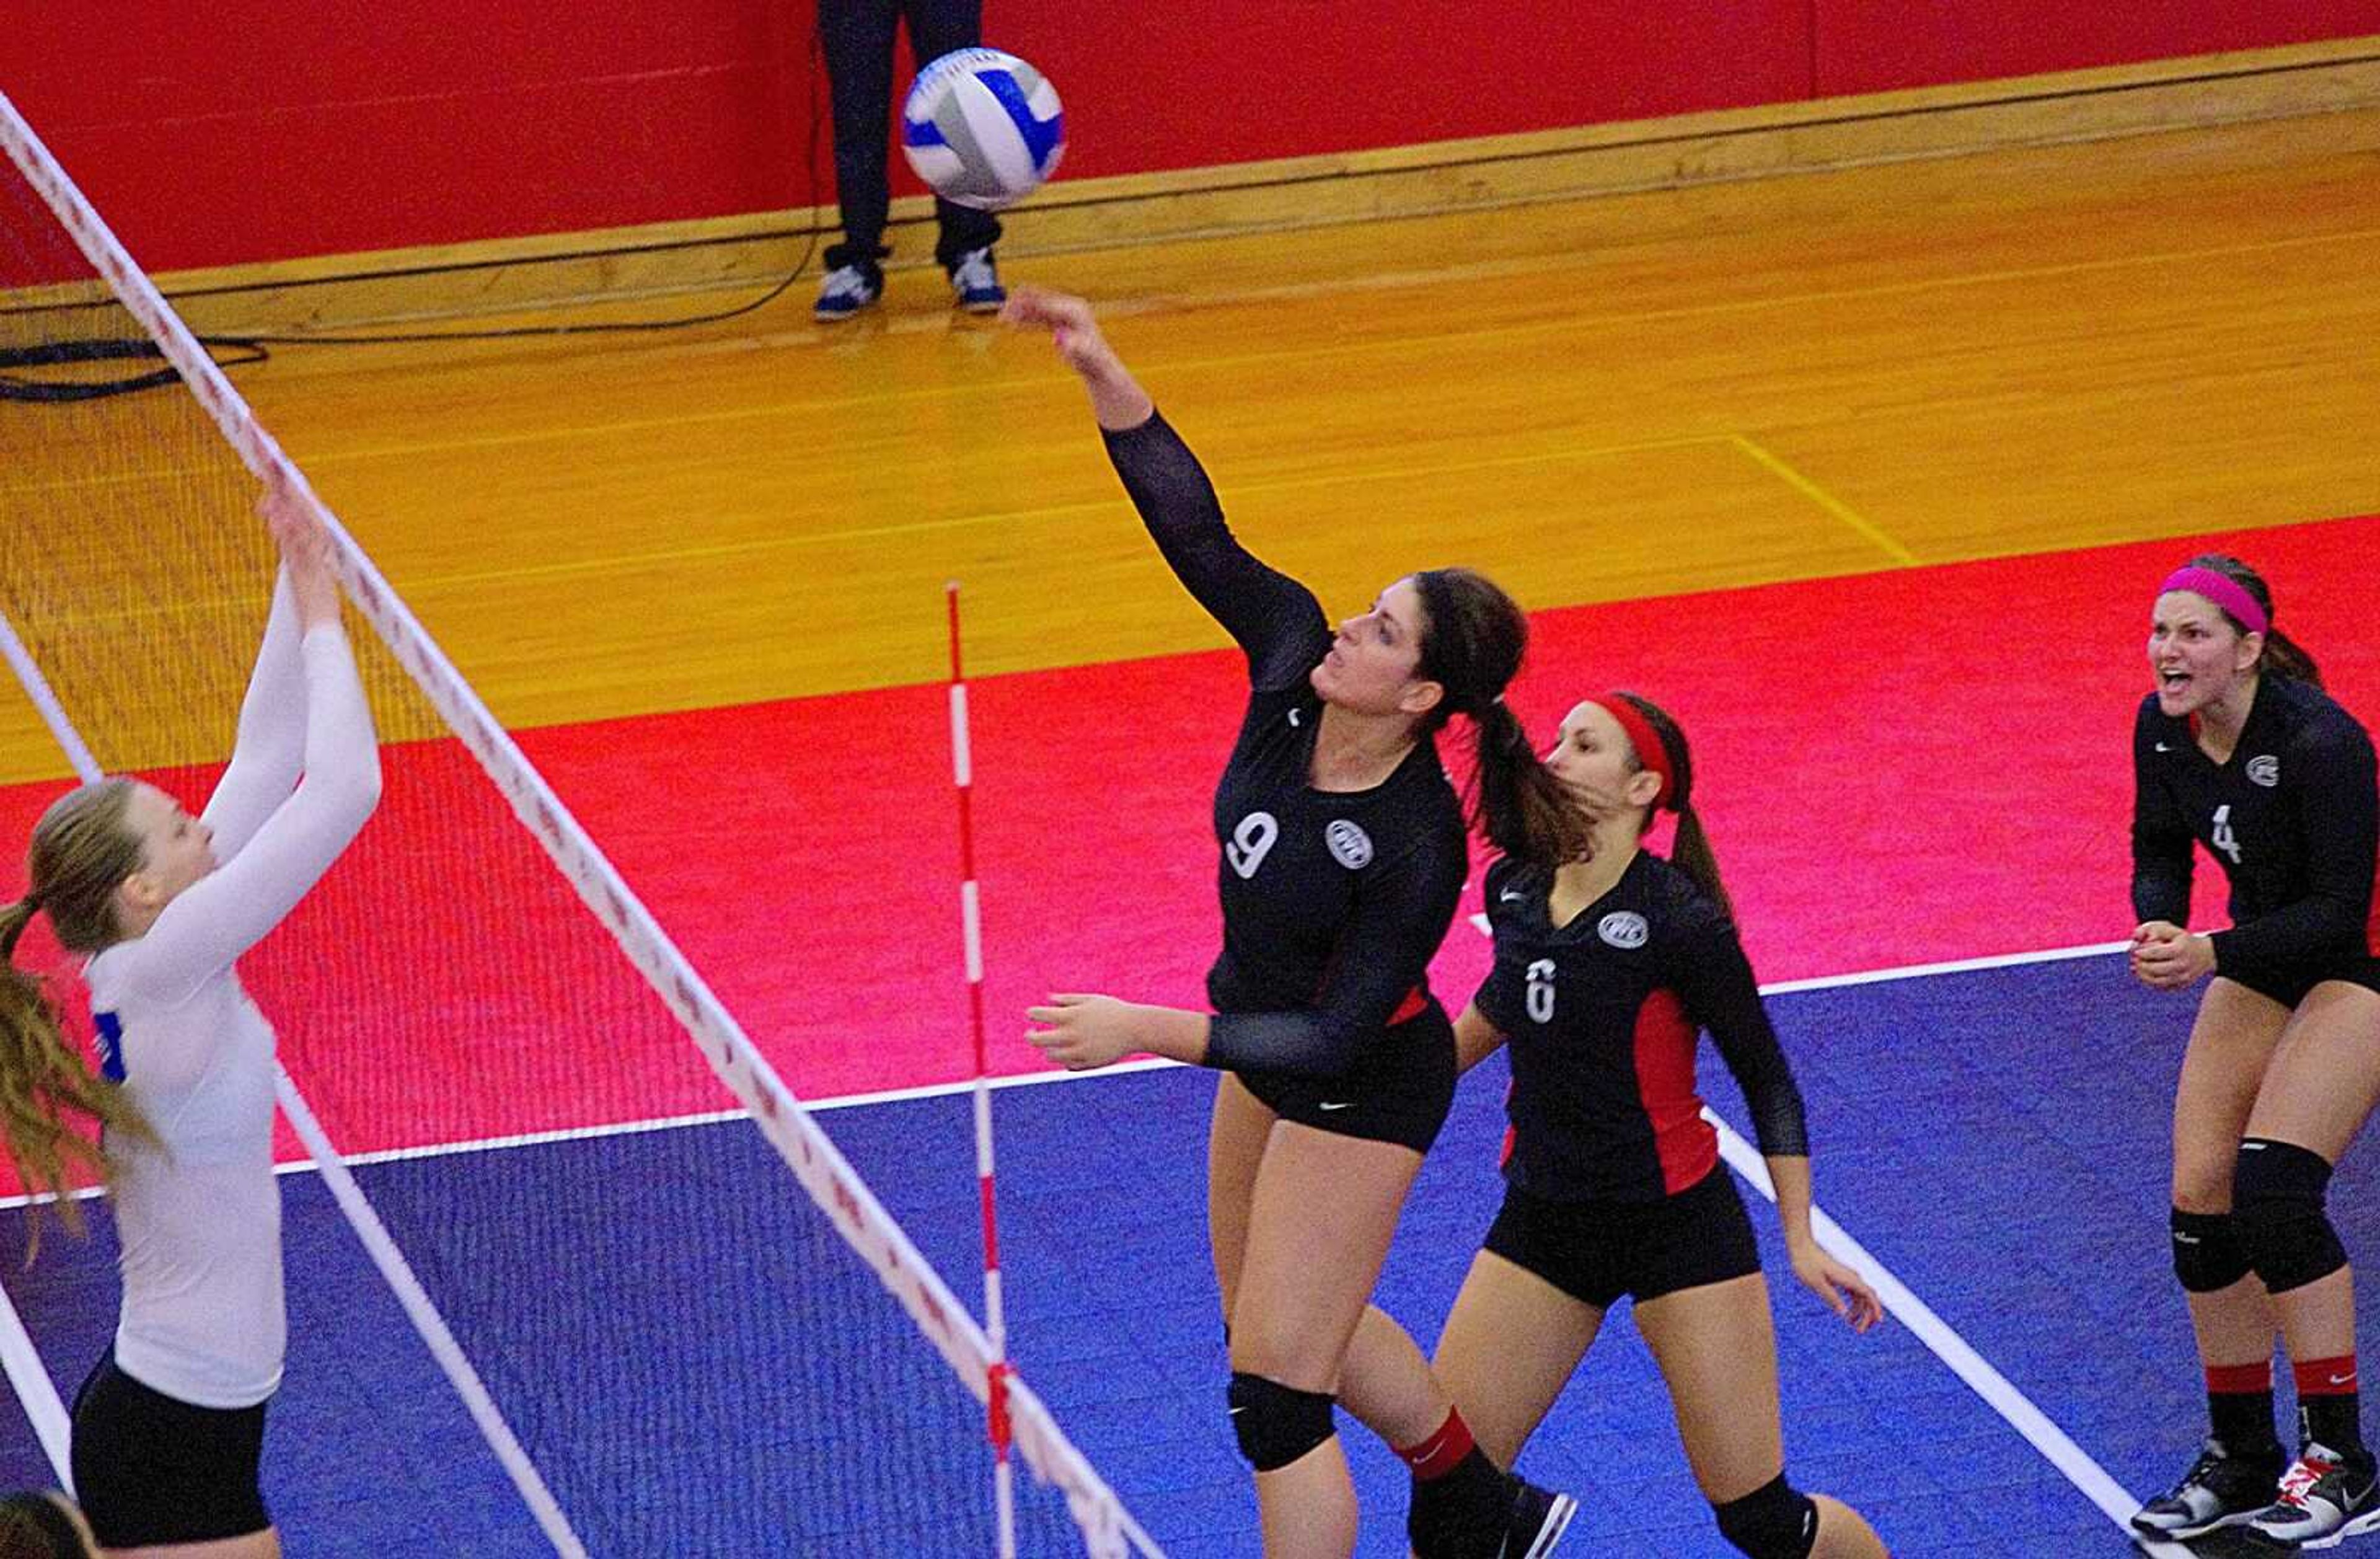 Southeast middle blocker Taylor Masterson spikes the ball during an Oct. 27 game against Eastern Illinois. Photo by Nathan Hamilton